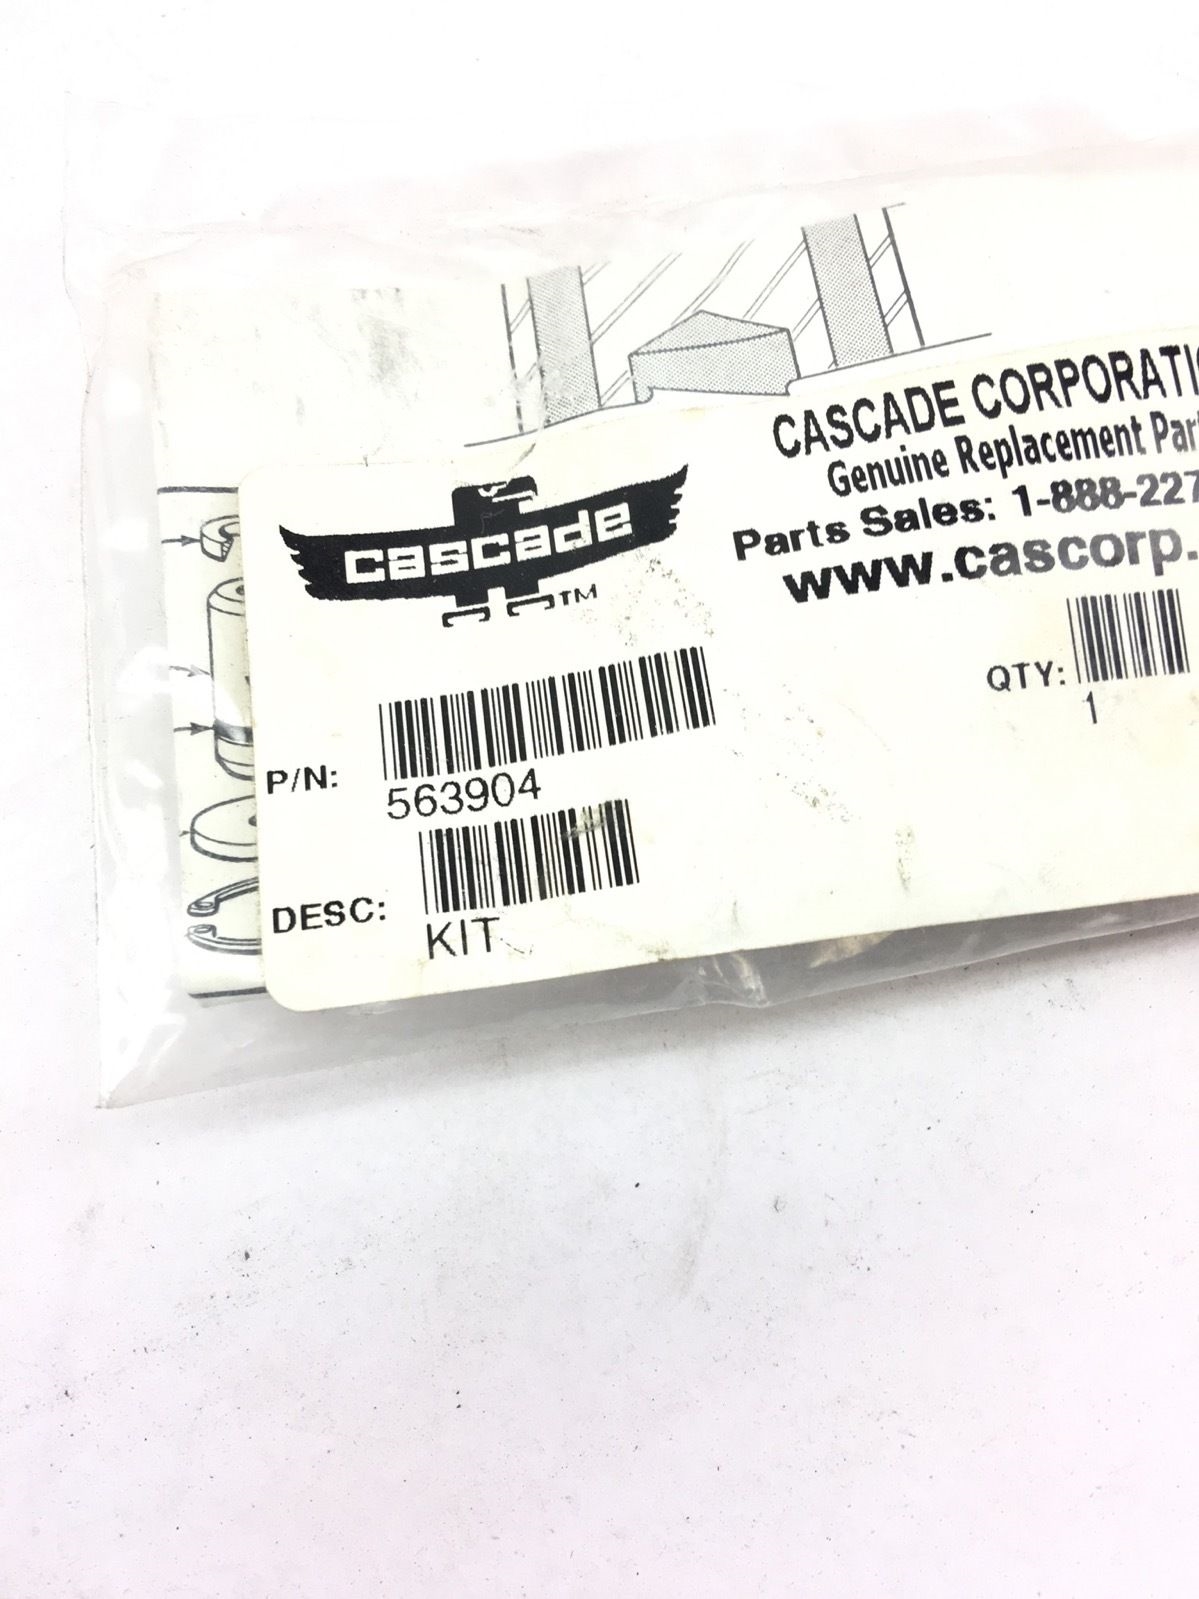 NEW IN BAGÂ CASCADE 563904 CHECK VALVE KIT, FAST SHIPPING! SB1 2